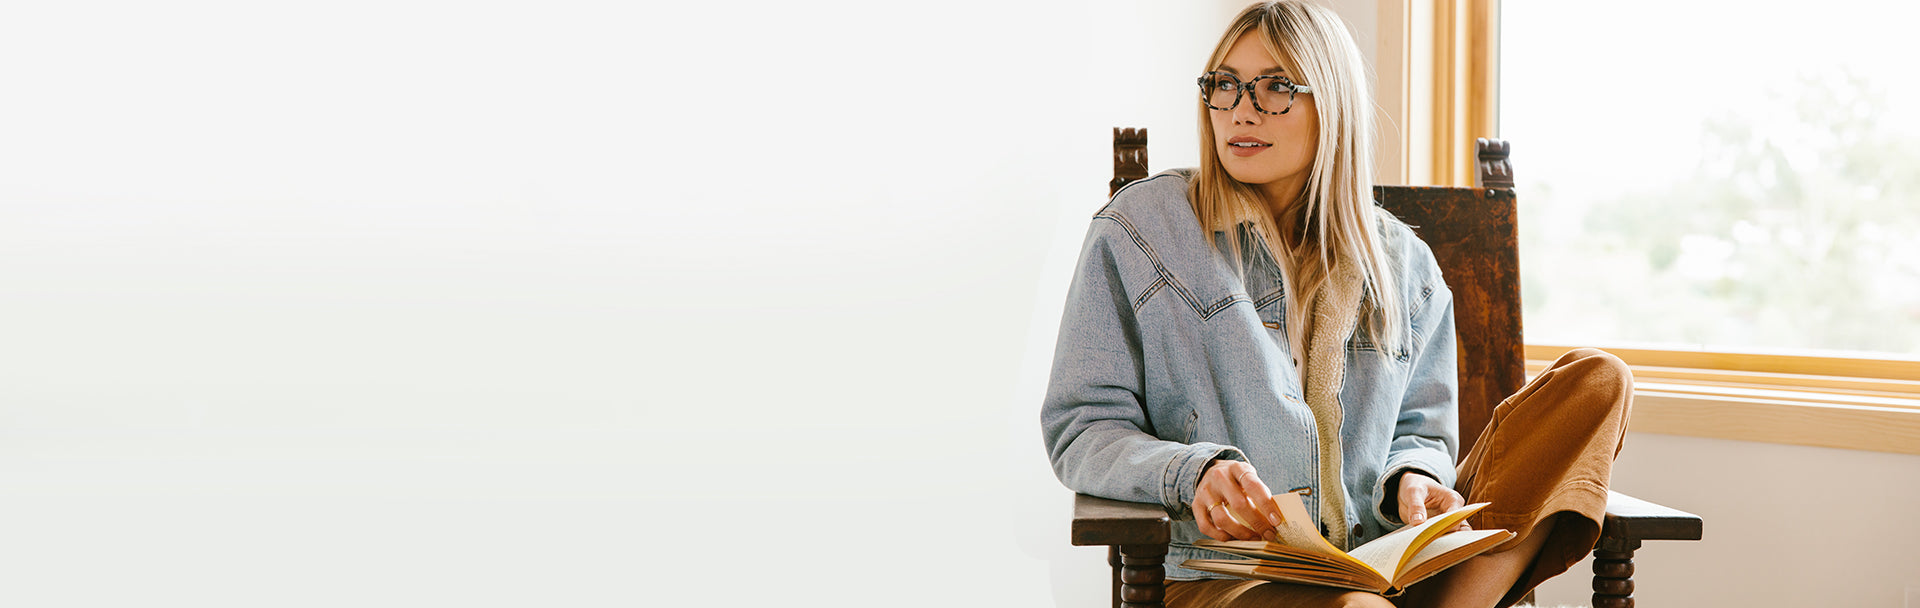 Blonde woman reading a book while wearing Peepers reading glasses